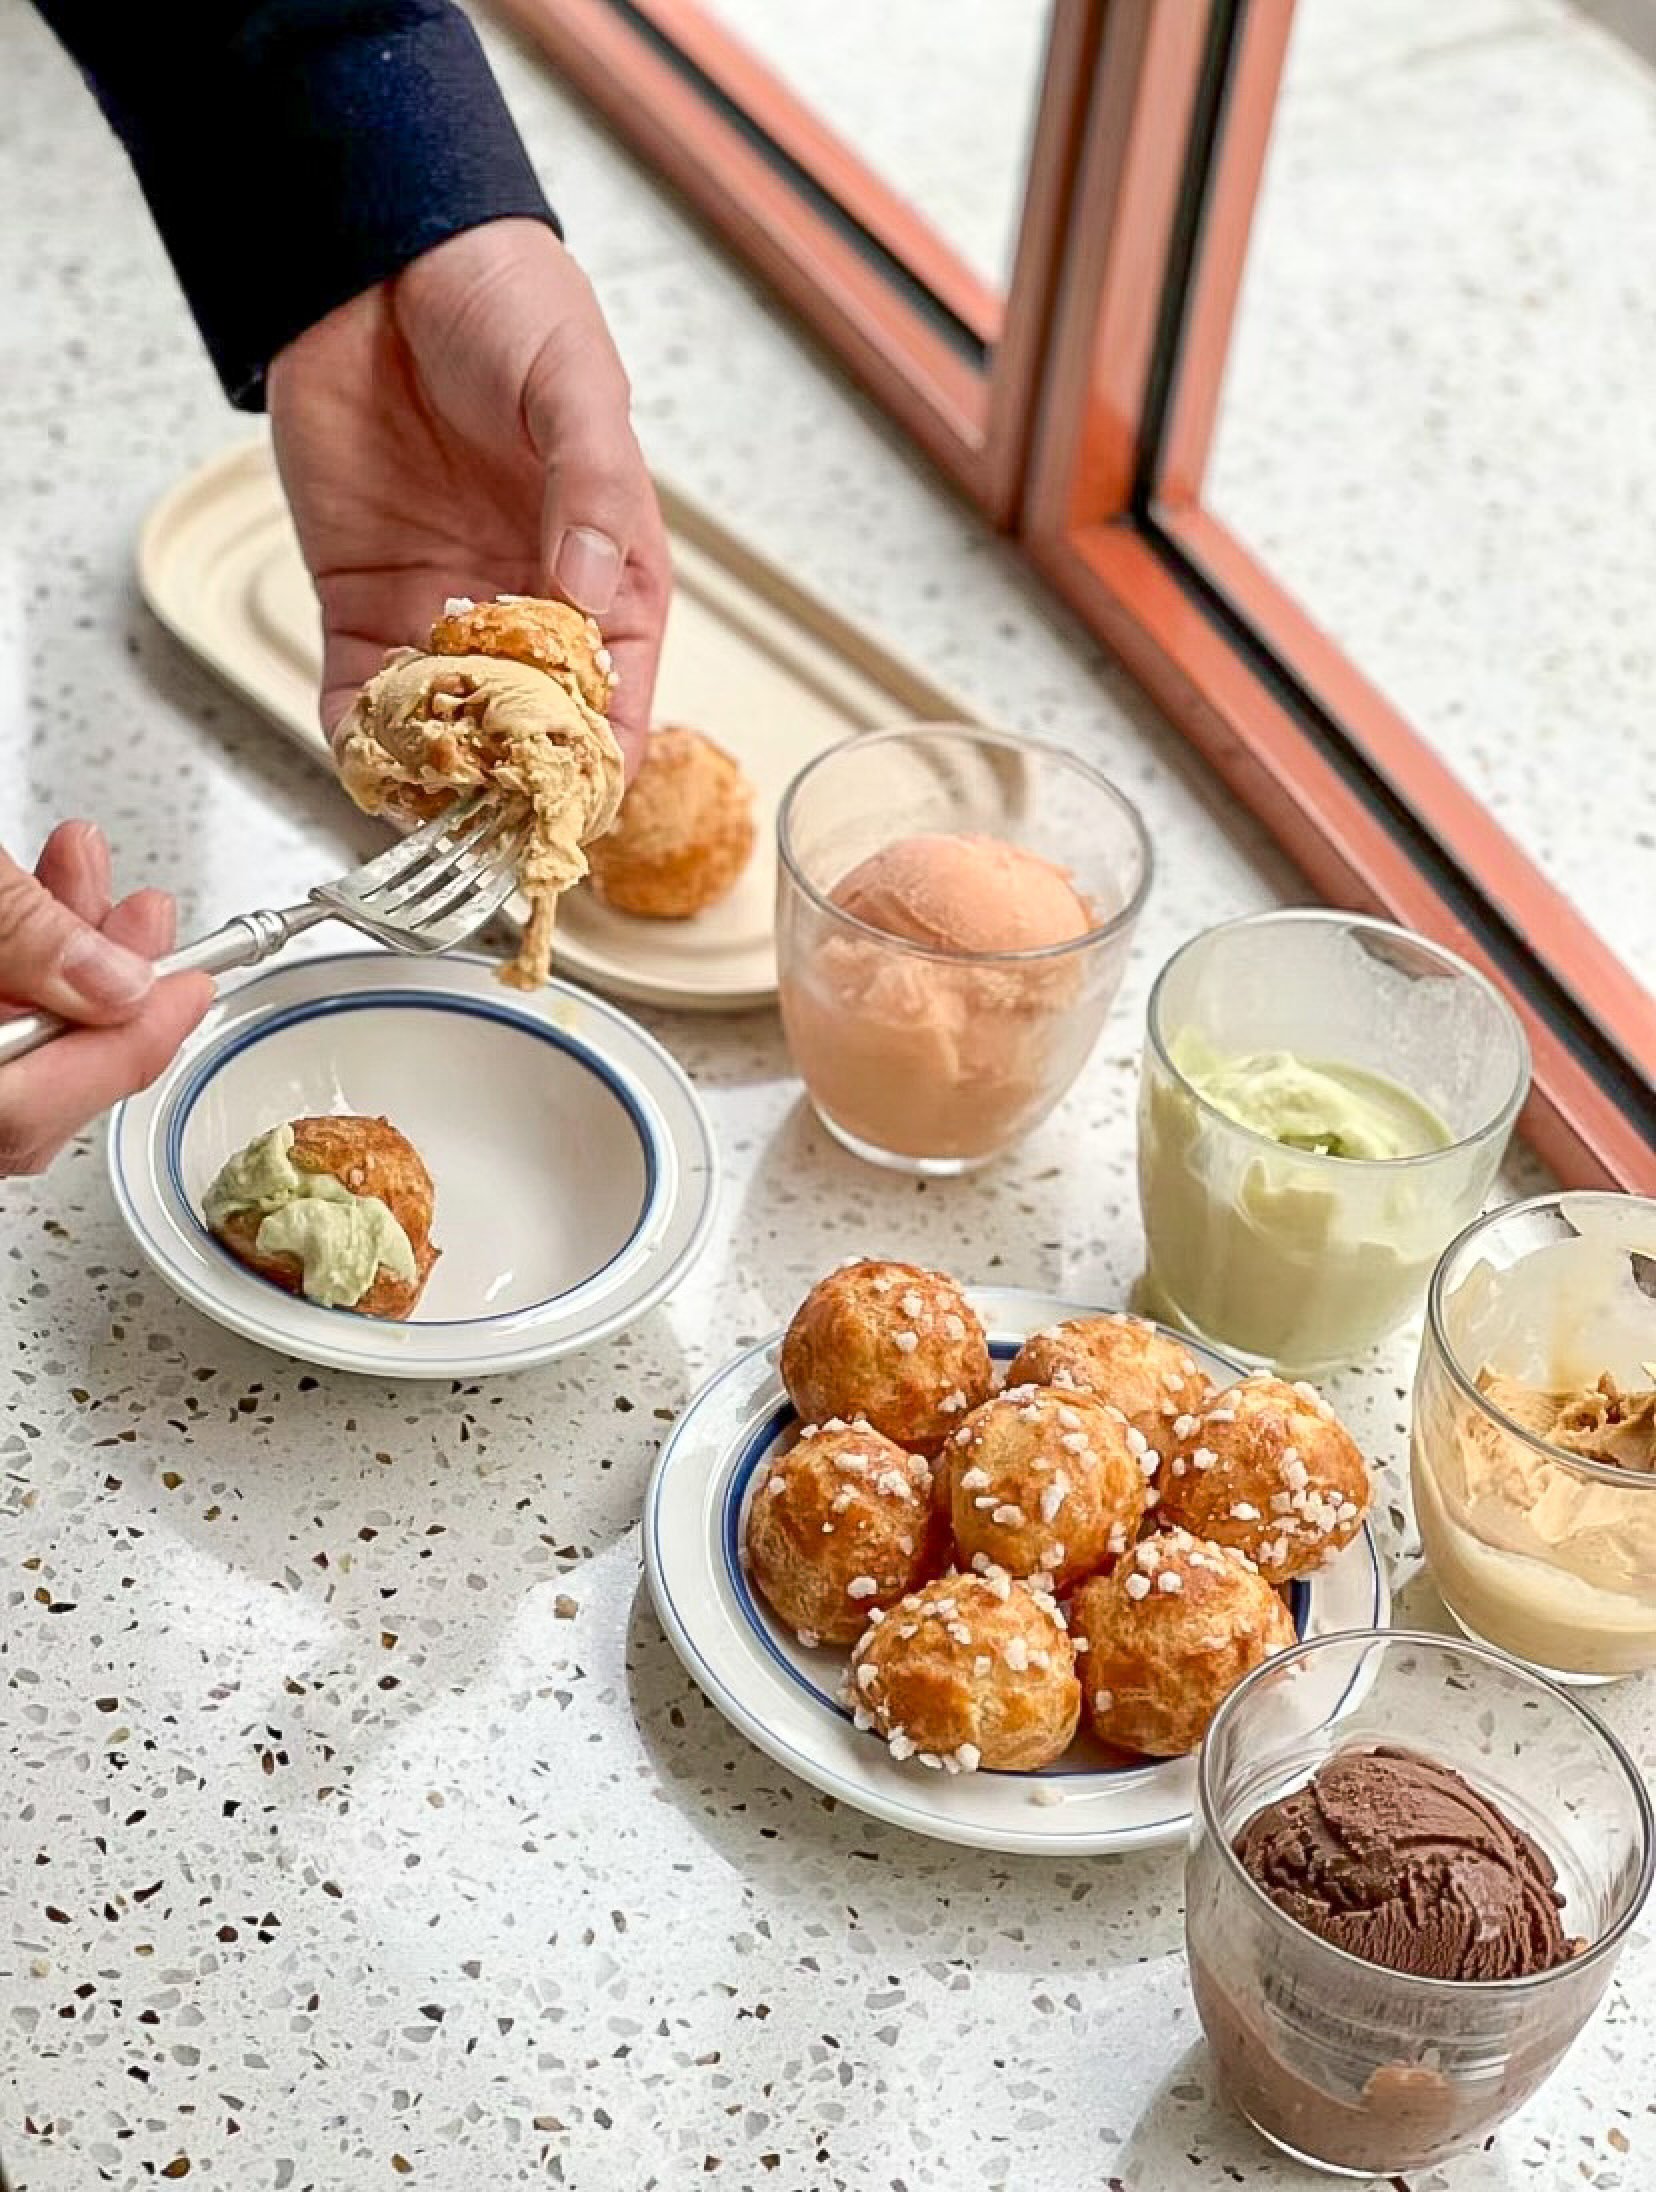 6 shanghai bakeries to visit on easy bicycle ride, with a stop at each to try sandwiches, ciabatta, babka and chouquettes filled with ice cream